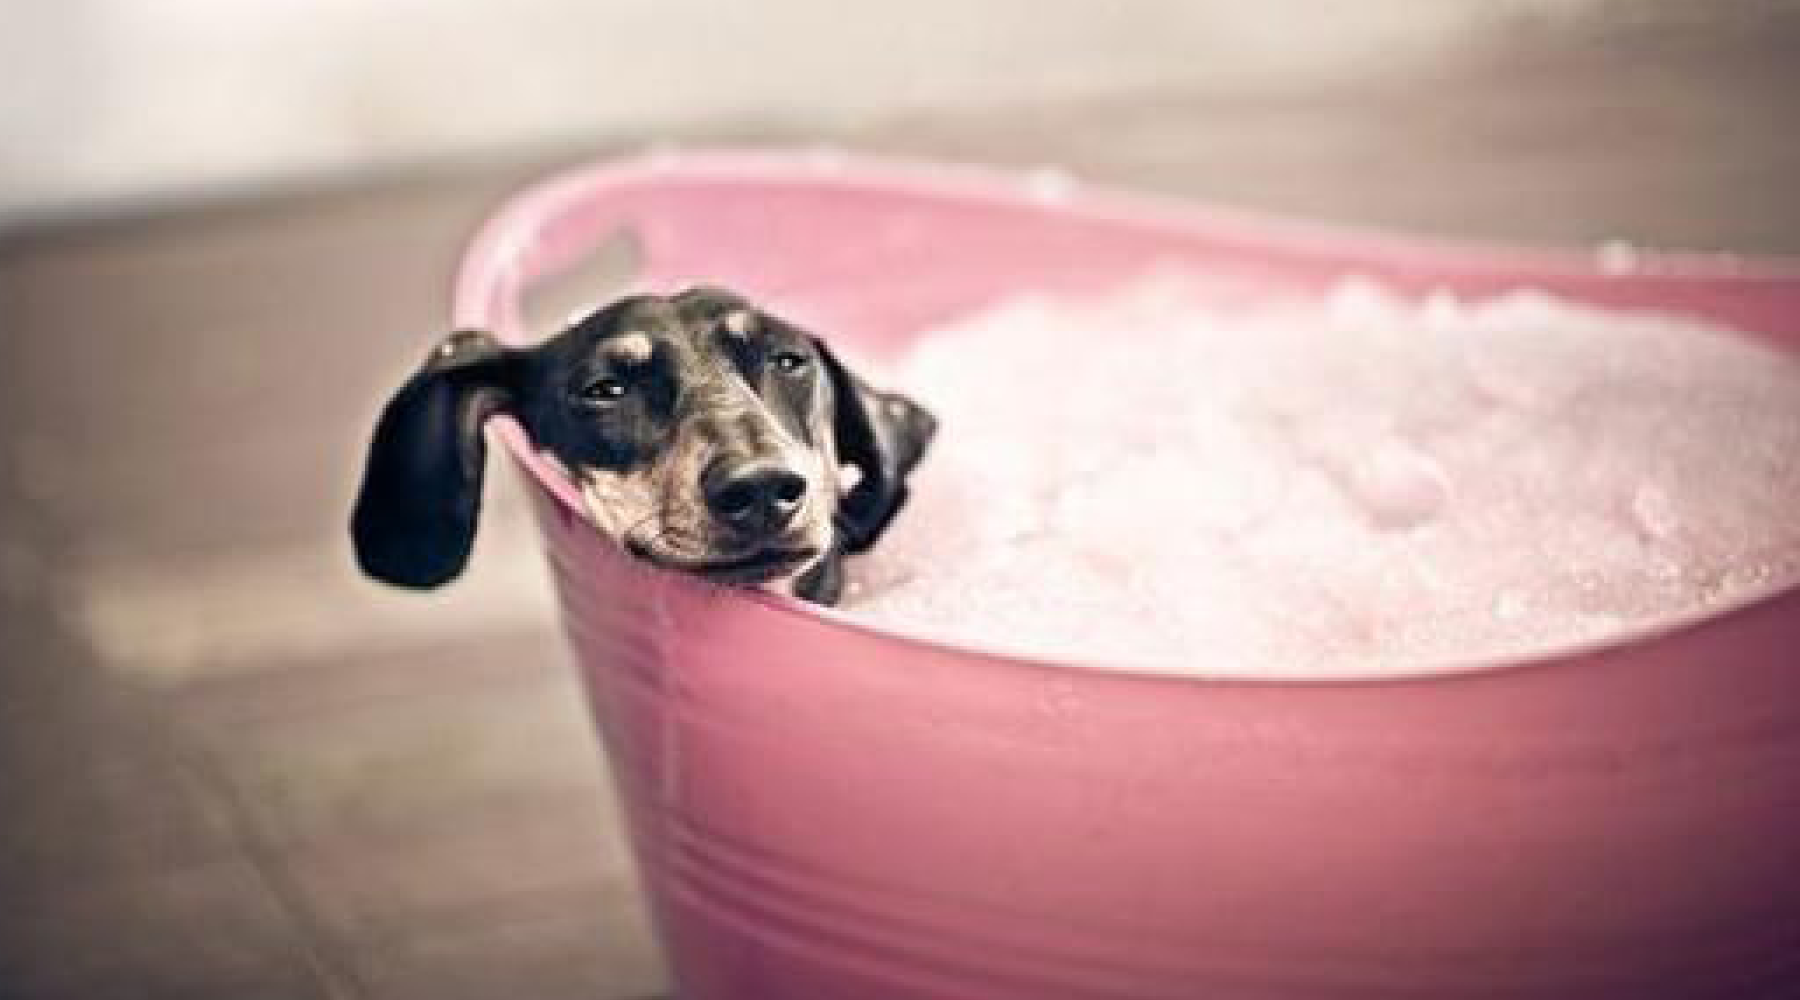 10 Tips For Bathing Your Dog Without Going Crazy